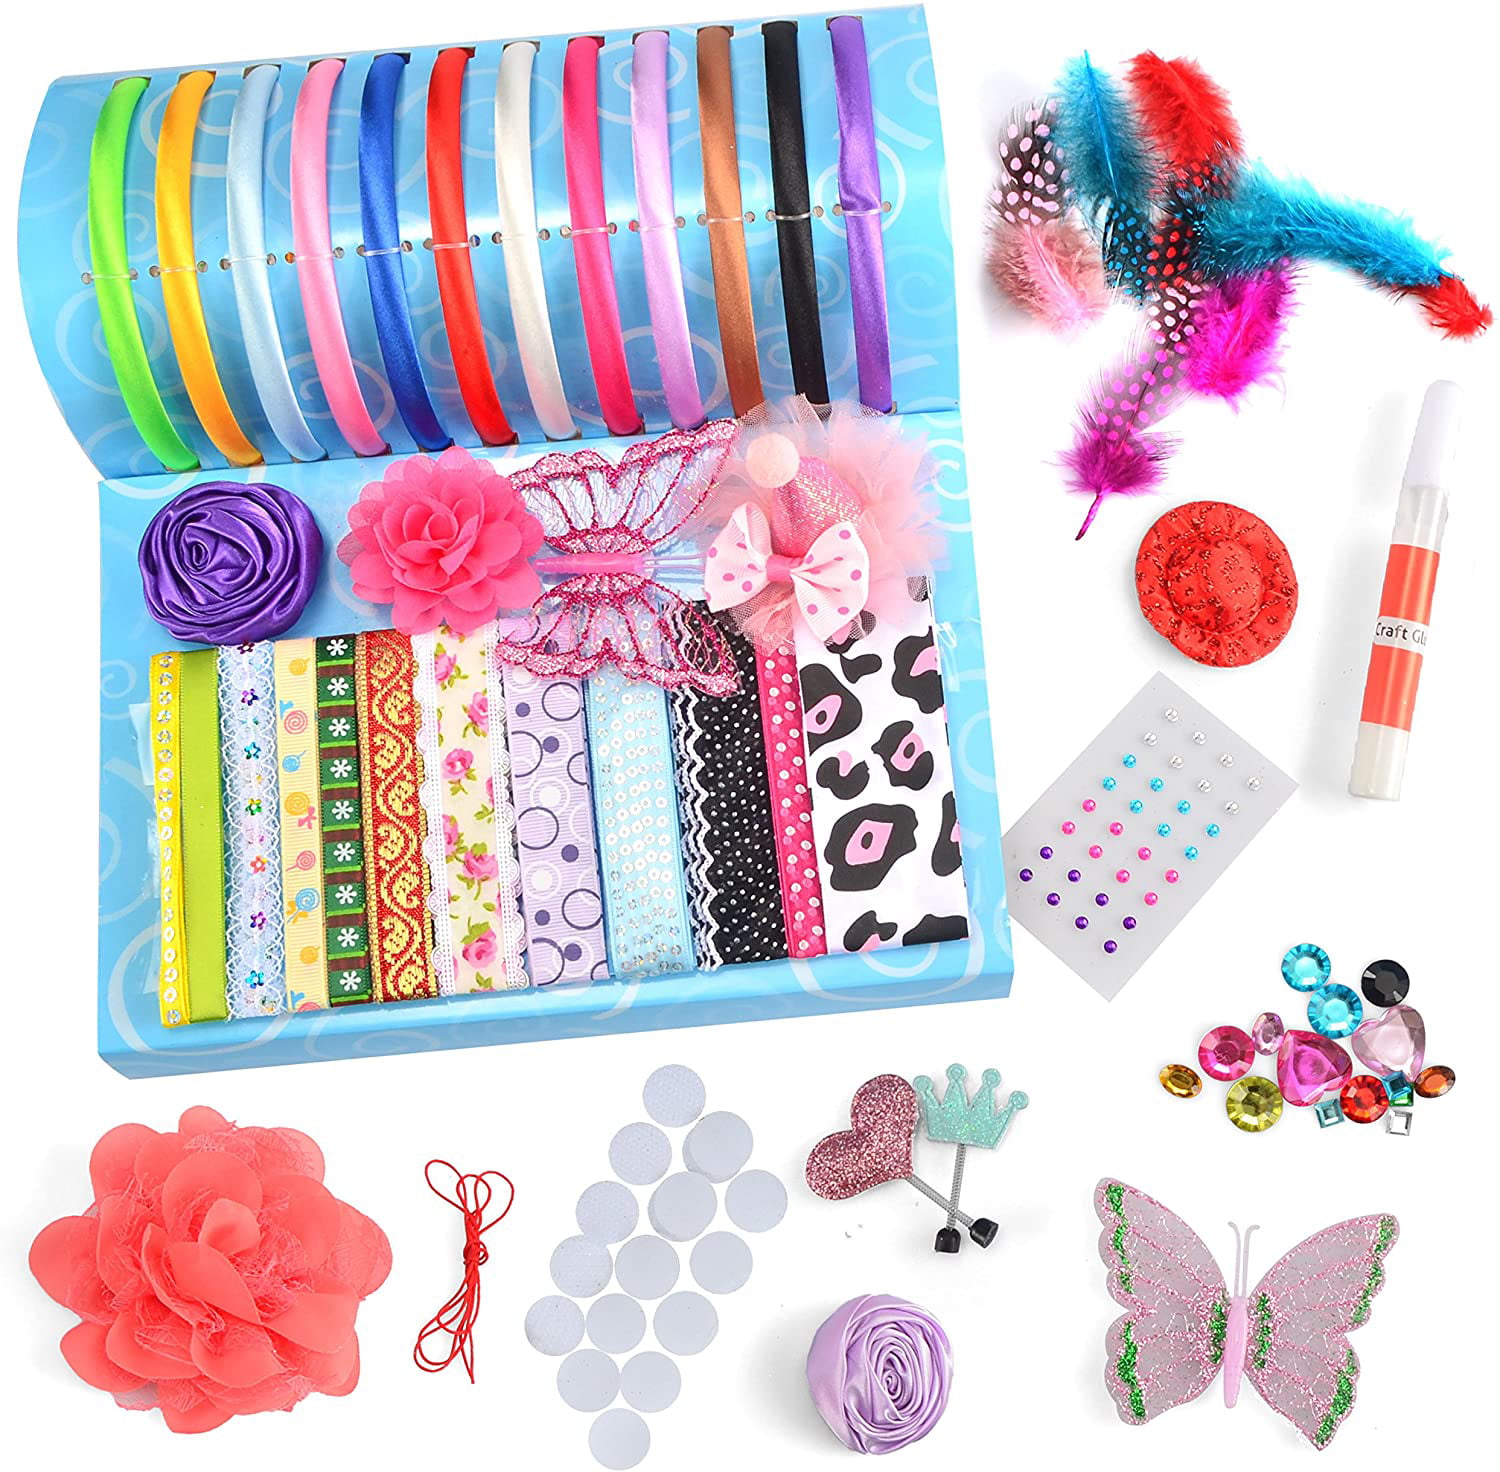 HEADBAND MAKING KIT for Girls - Crafts for Girls Ages 6-8, Include 12  $48.13 - PicClick AU